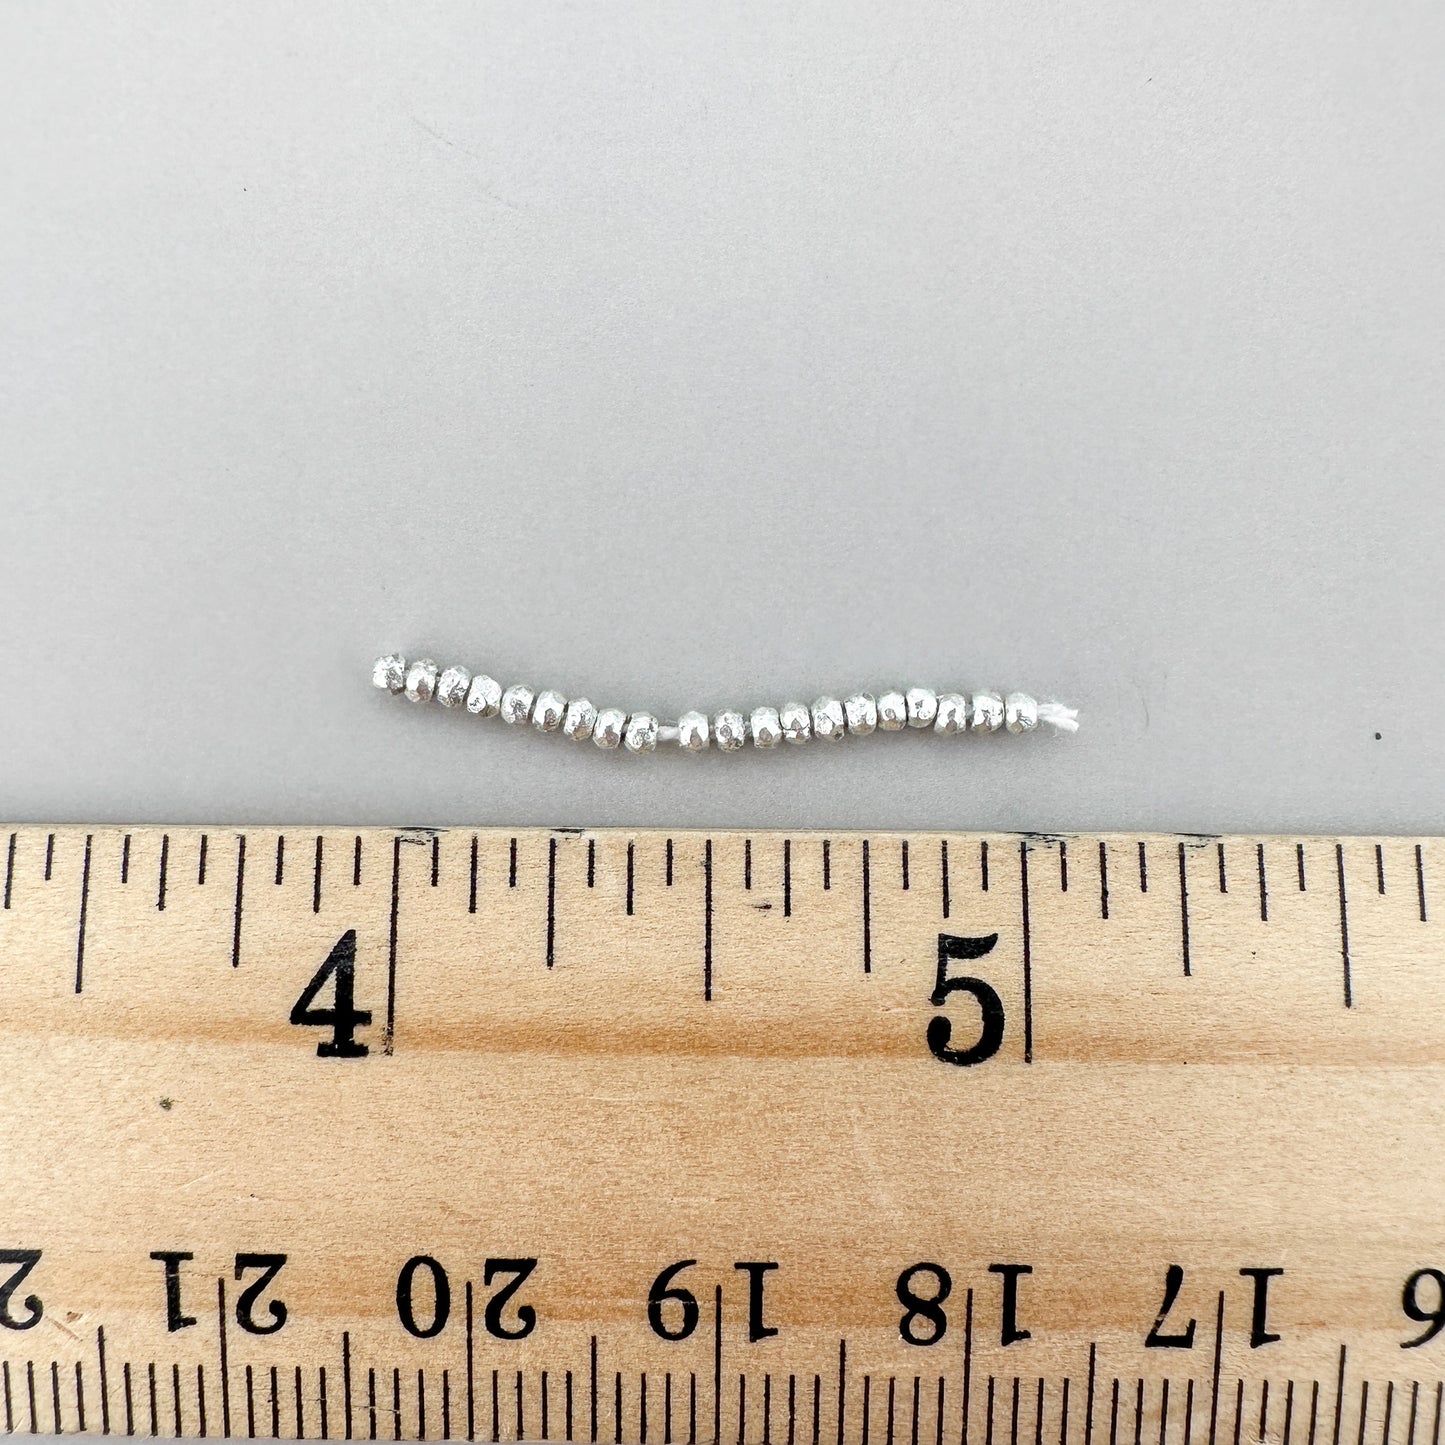 2mm Faceted Bead (Thai Silver) - 1 INCH (M172)